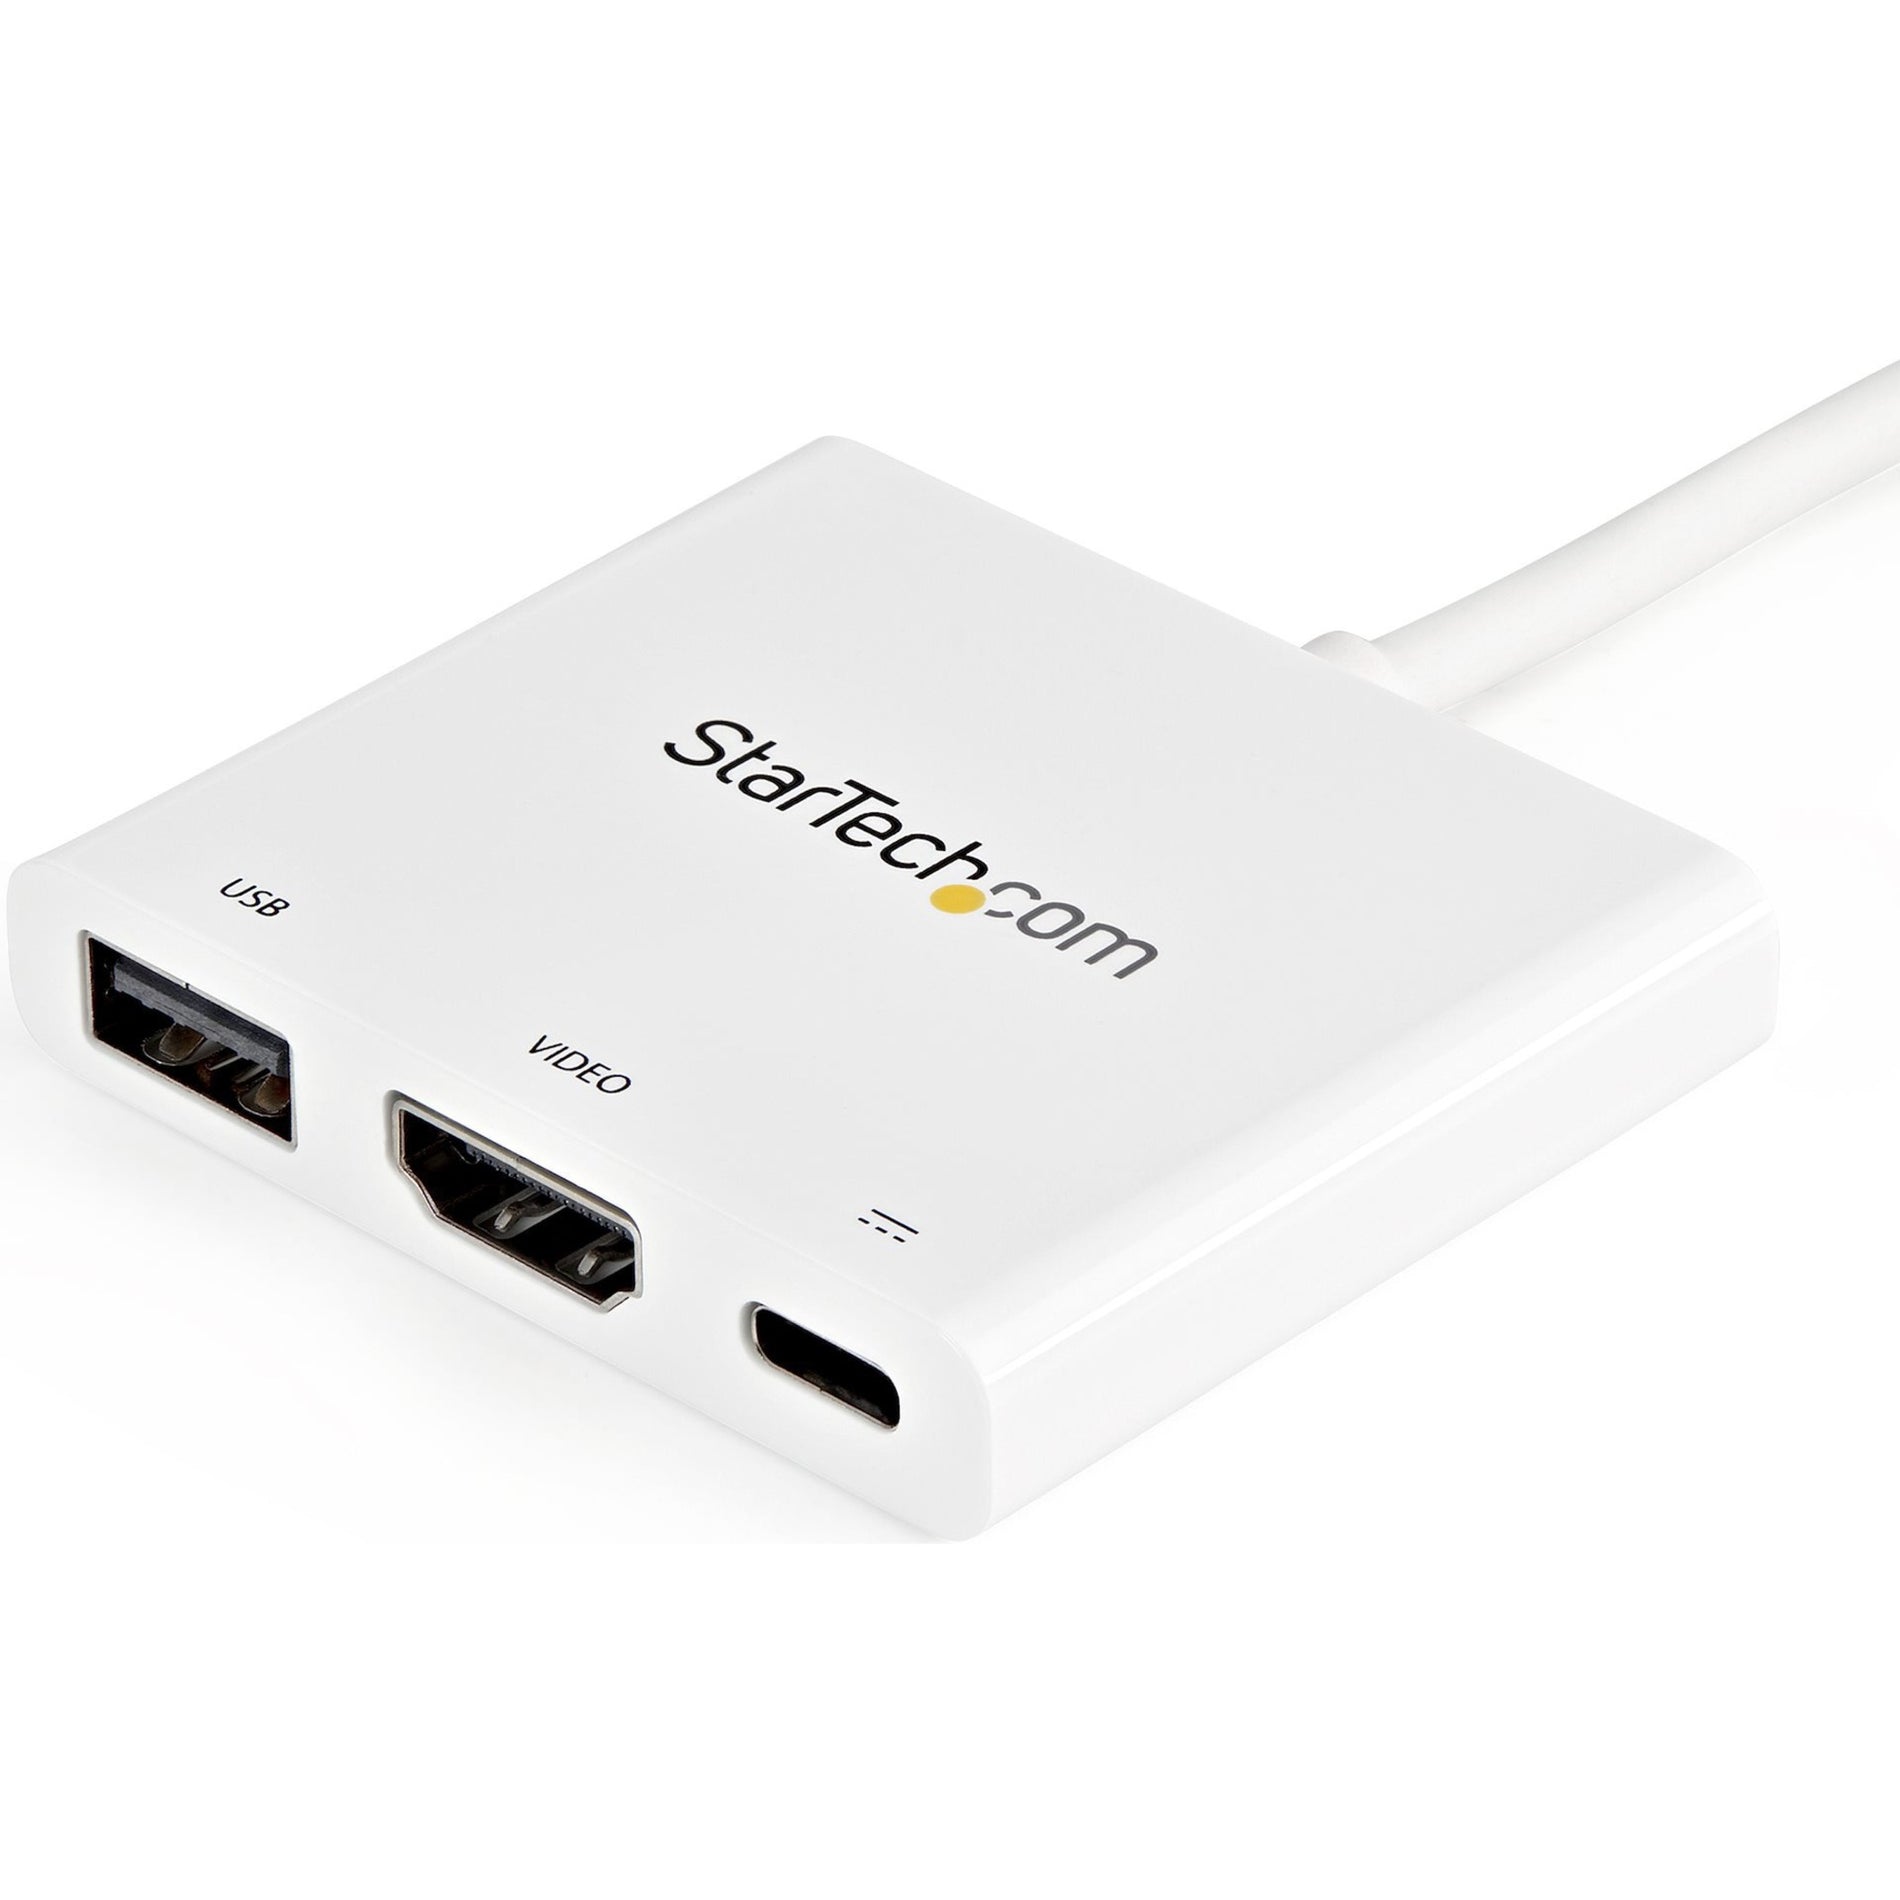 StarTech.com CDP2HDUACPW USB-C to 4K HDMI Multifunction Adapter, White - USB Type-C to HDMI, USB C Laptop Travel Adapter